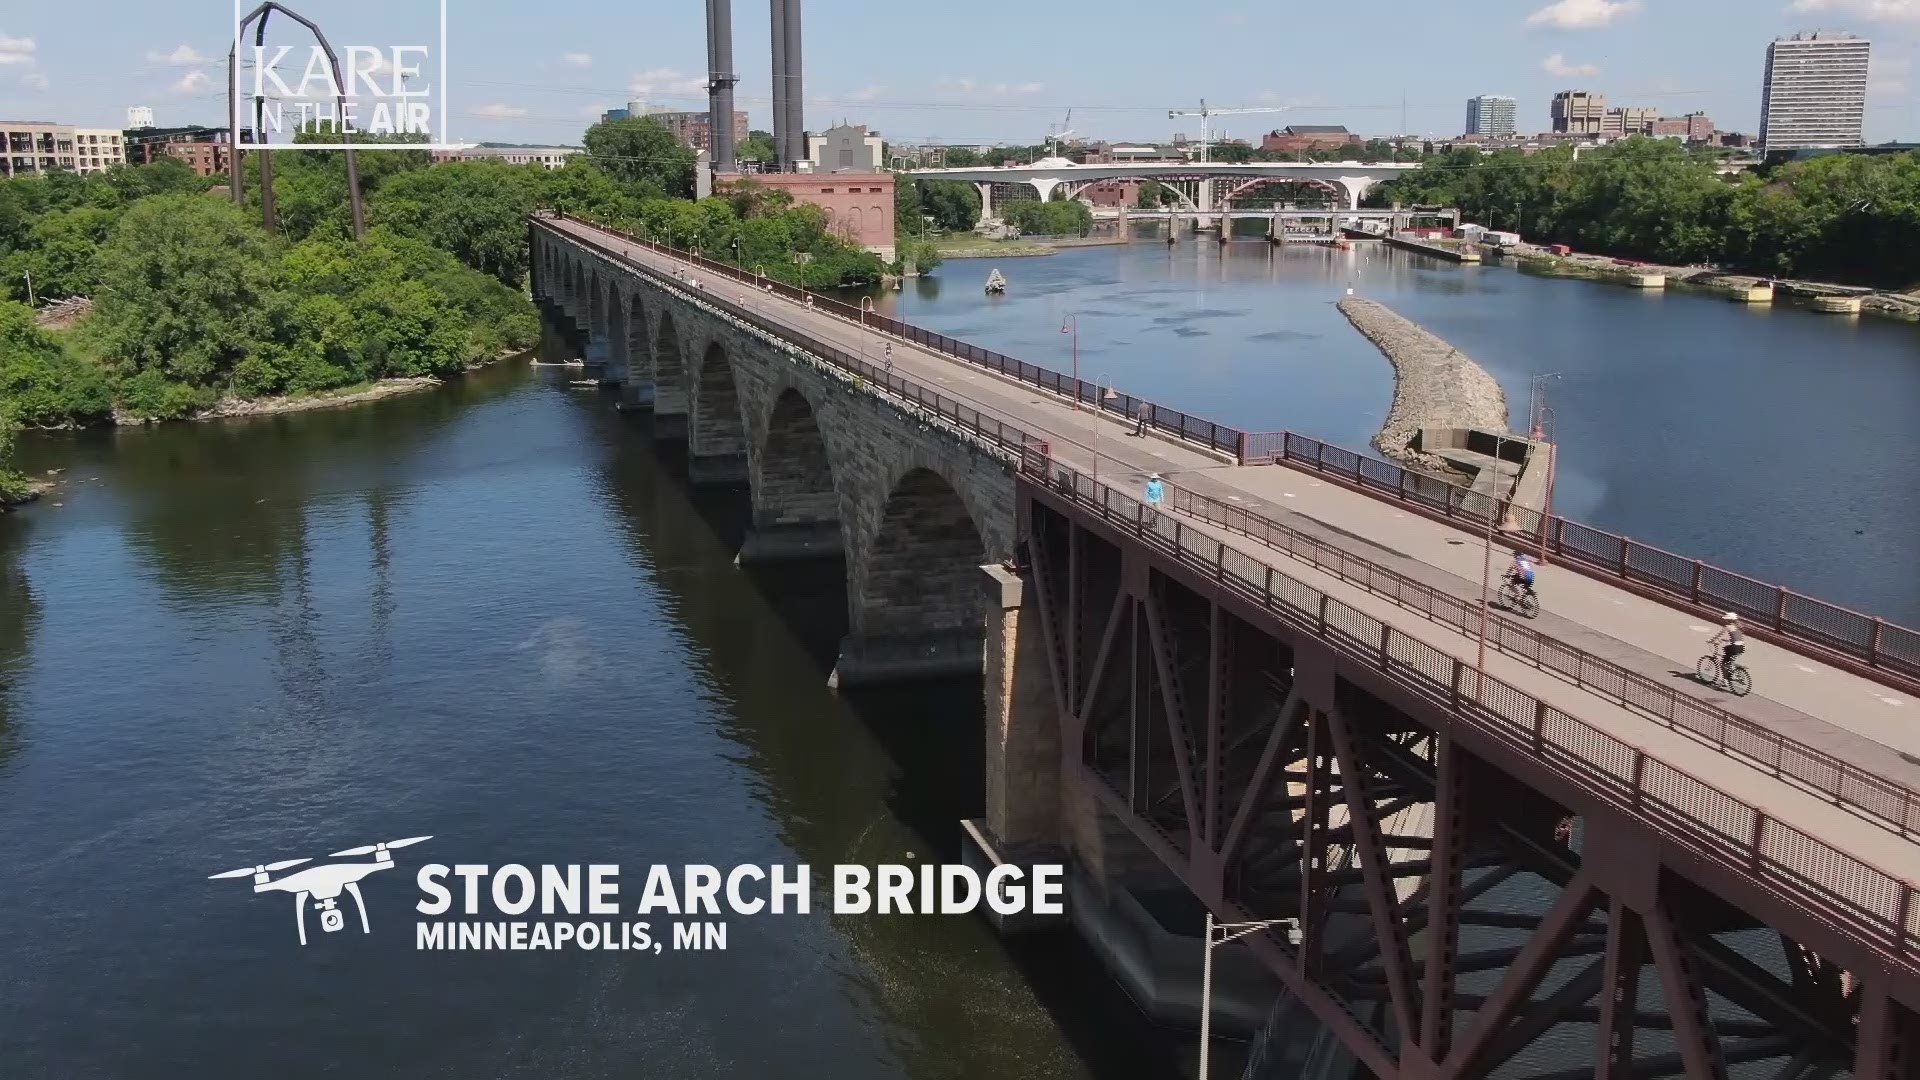 Originally built to carry trains across the Mississippi, the Stone Arch Bridge in now caters to pedestrians, bikers, and visitors looking for a good photo backdrop.